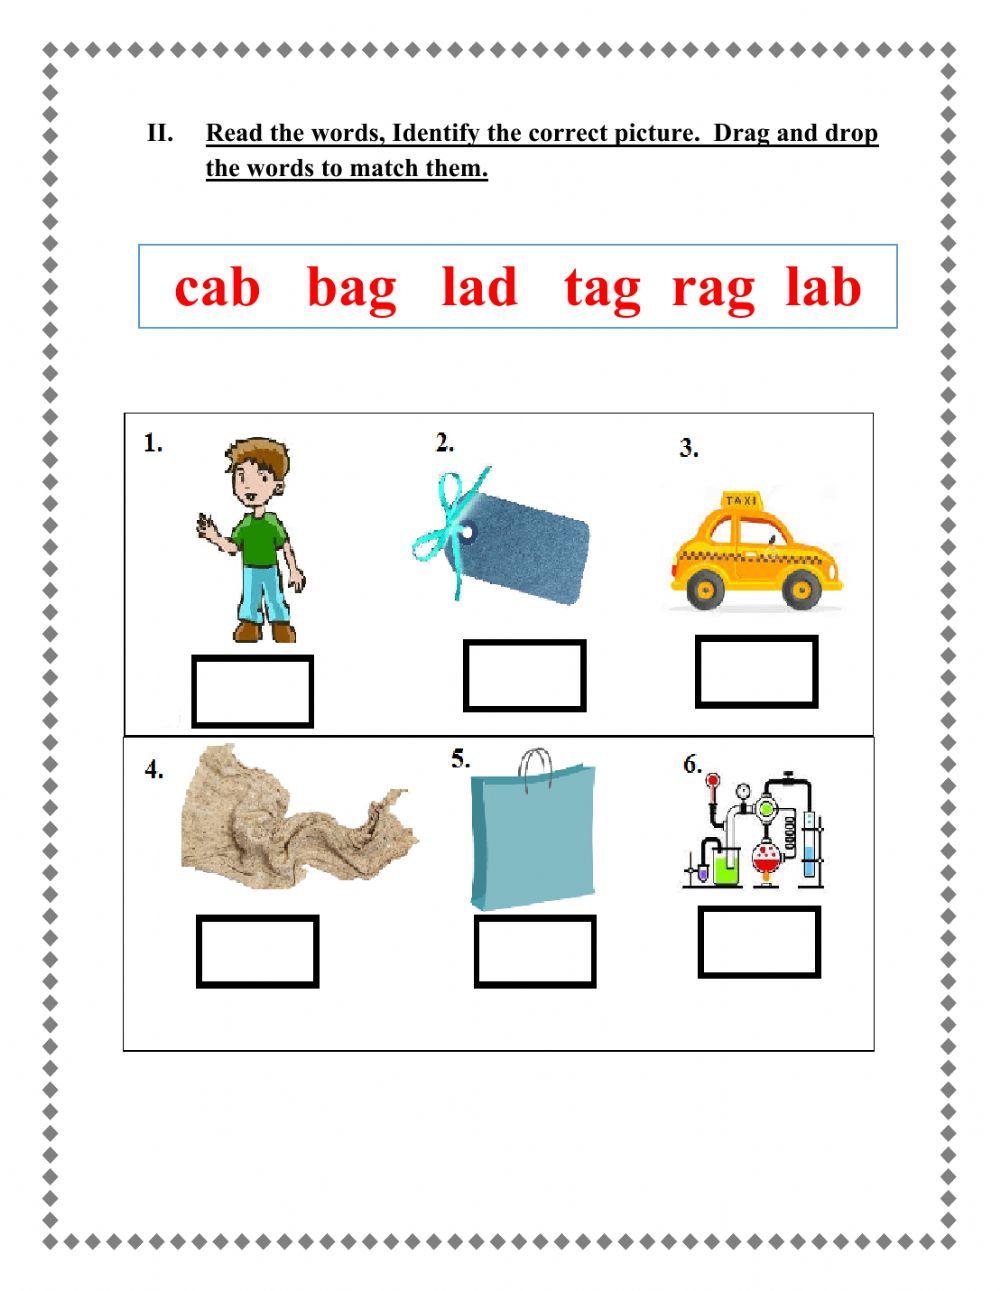 Sight words and CVC Words